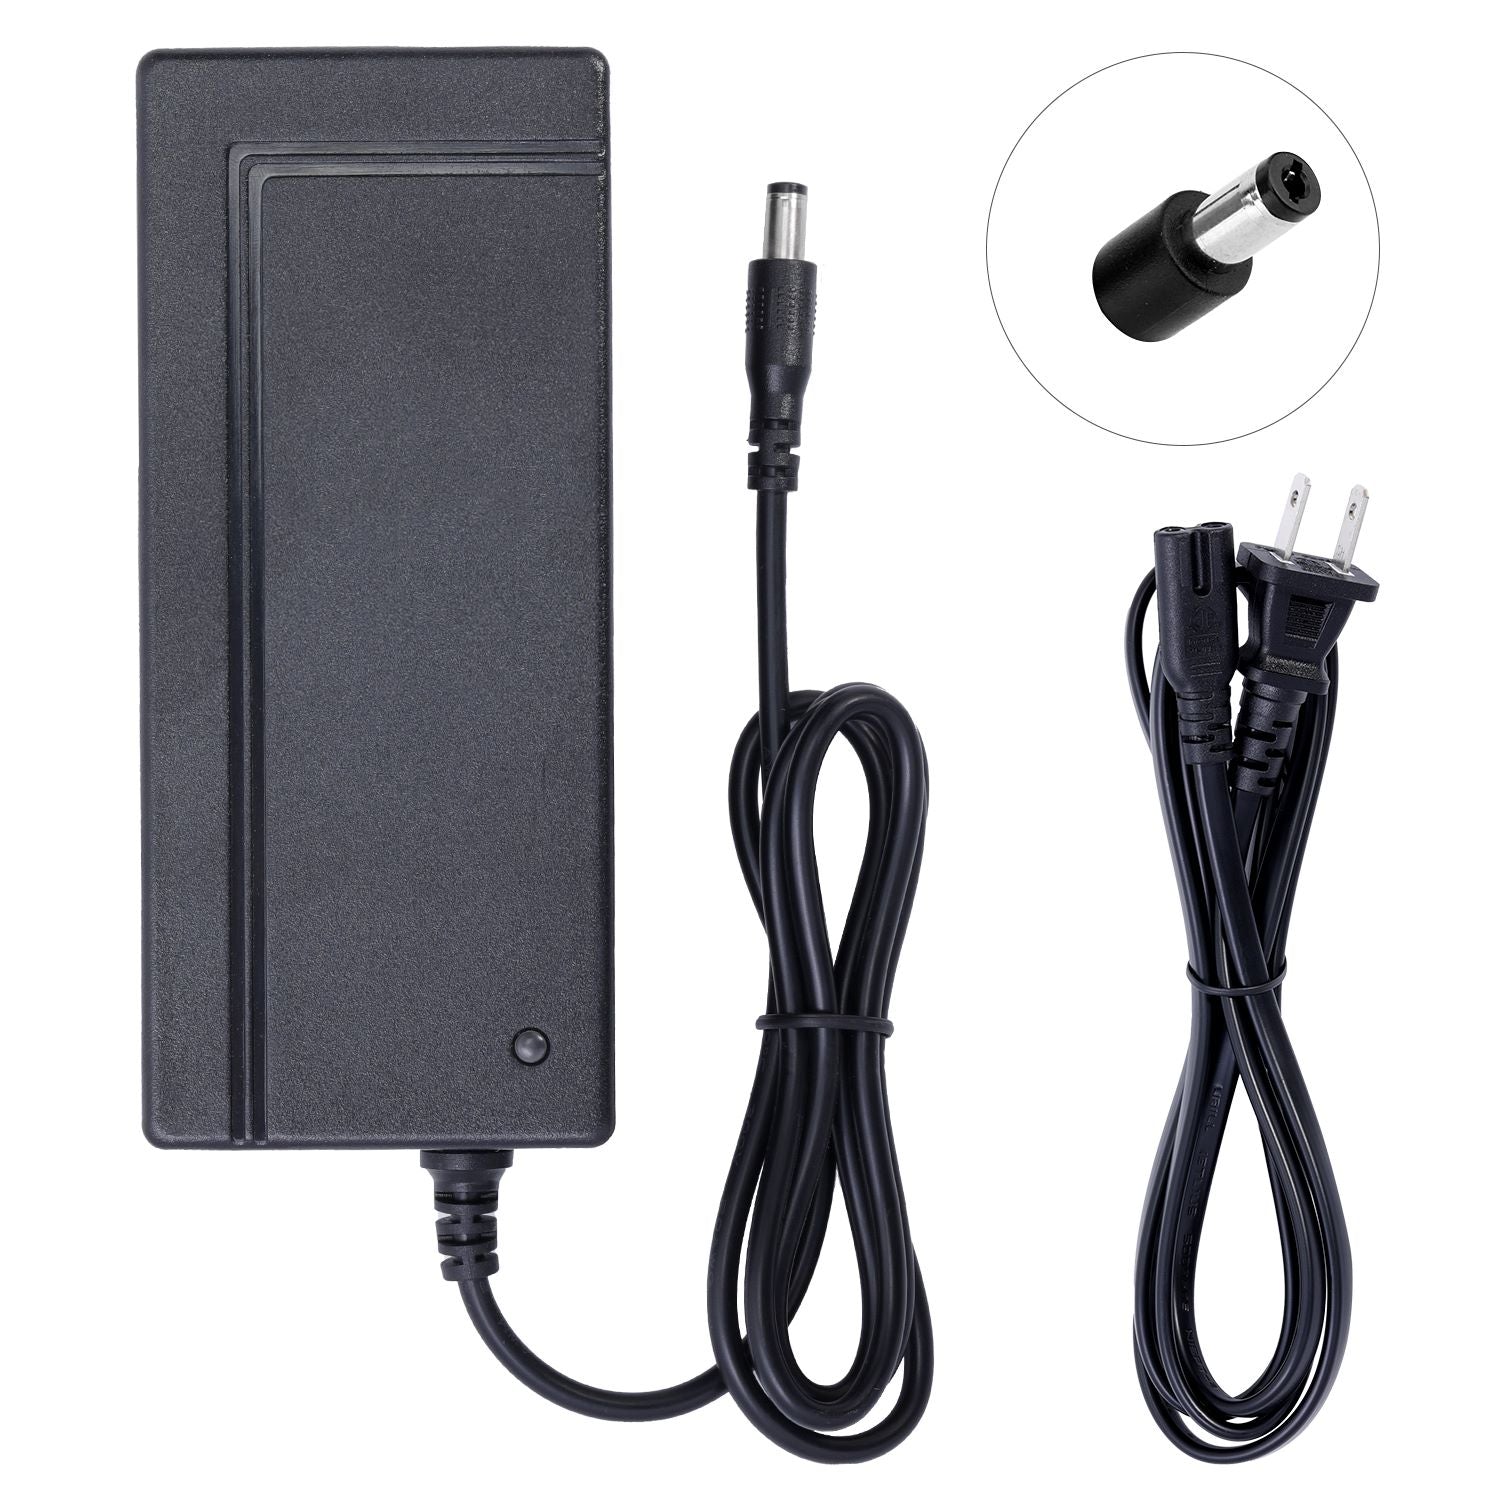 UL Certified Charger for Swagtron EB Series Electric Bike (NOT for EB6).